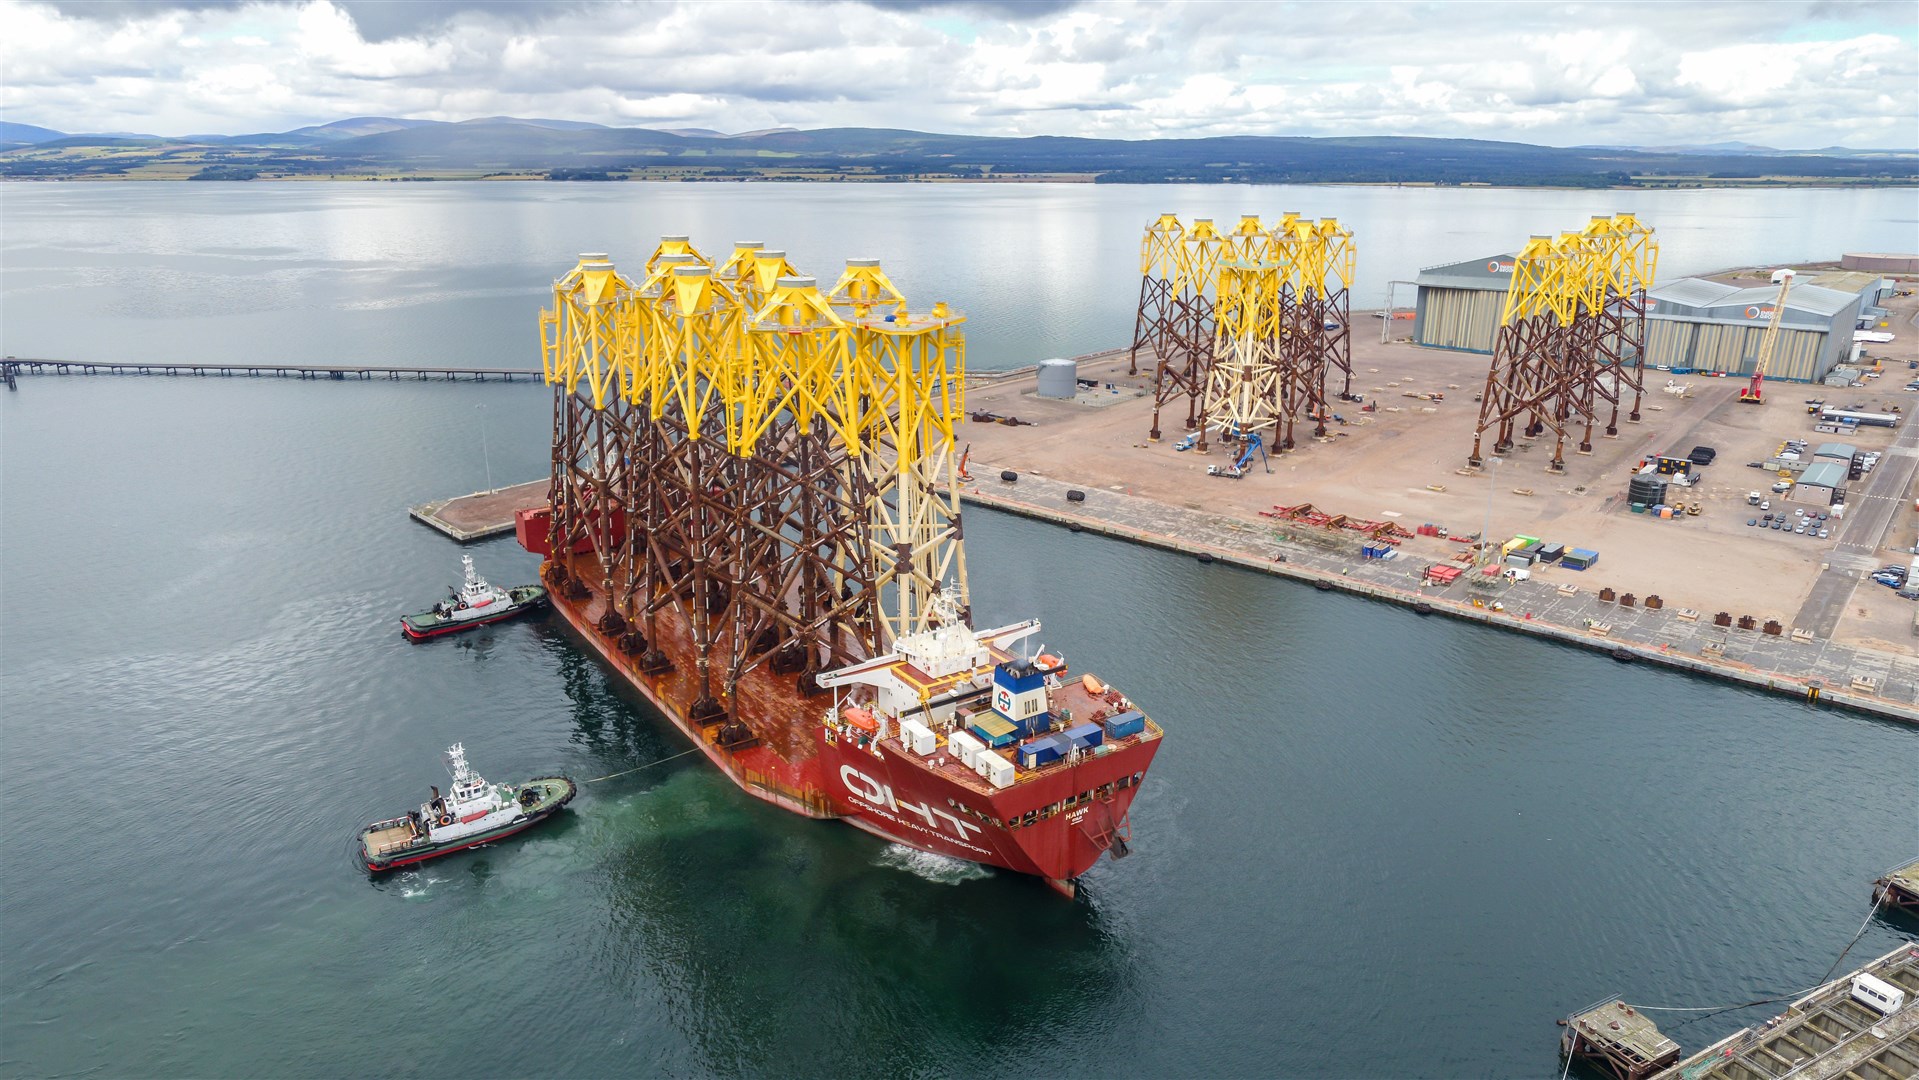 The heavy transport vessel OHT Hawk arrives on the Cromarty Firth carrying wind turbine jackets for the Moray Offshore Wind Facility to Nigg Energy Park. Image by: Malcolm McCurrach.